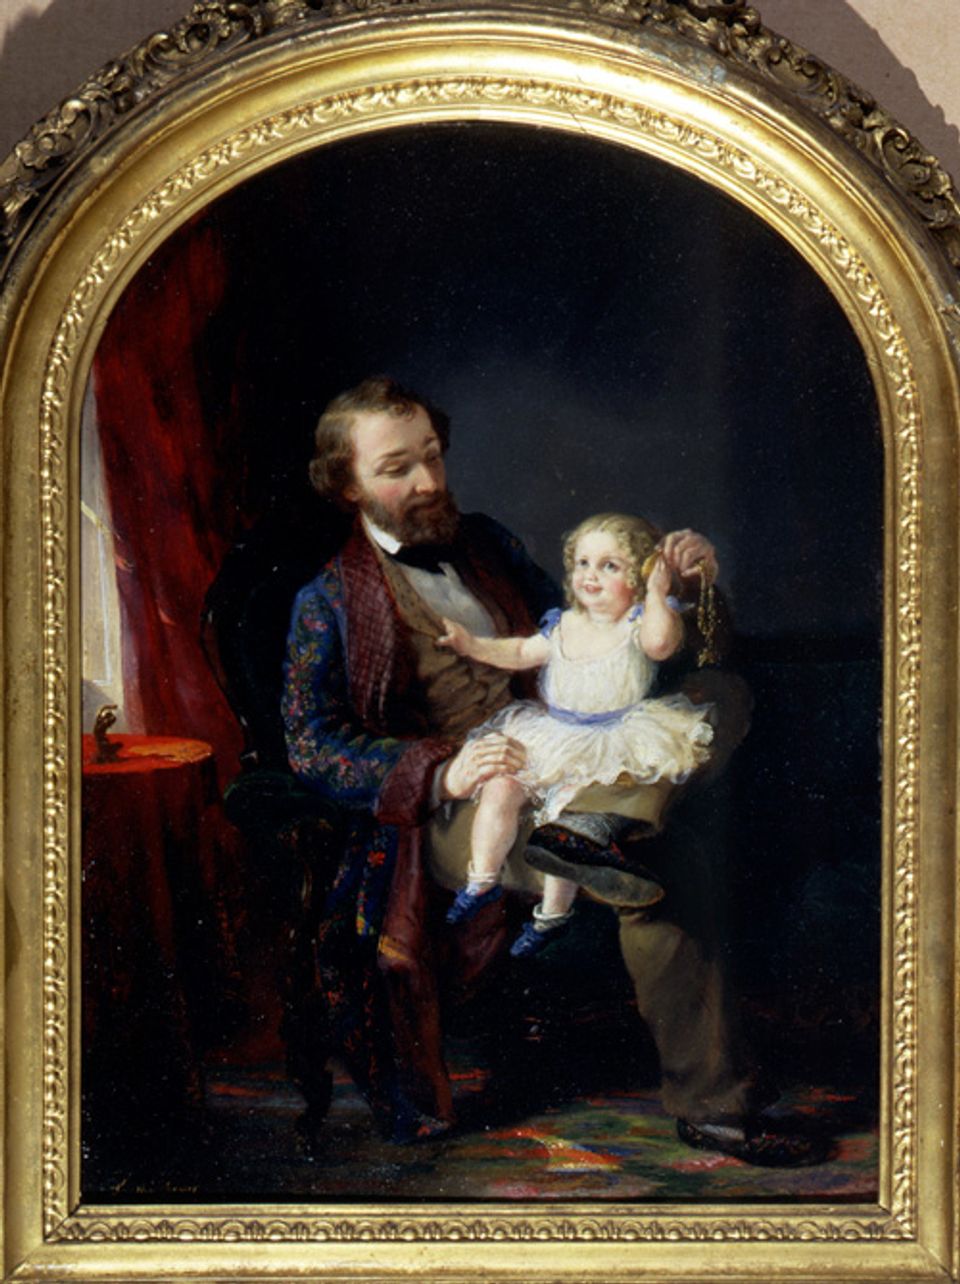 Spencer's oil on board of a father with his young daughter on his lap.